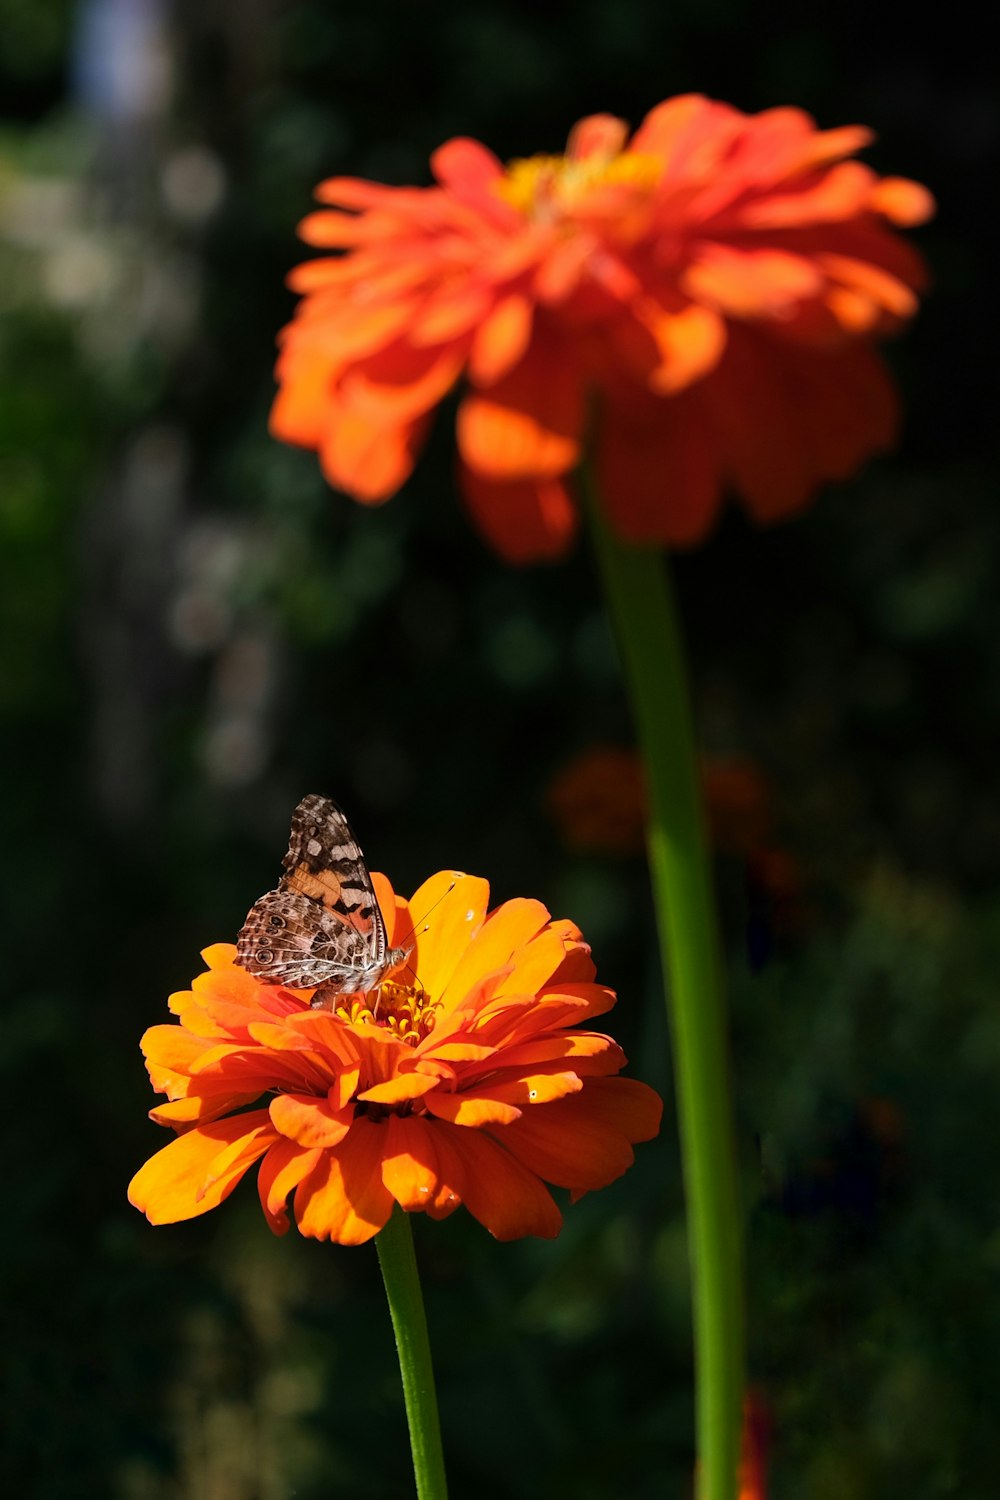 a butterfly sitting on top of an orange flower